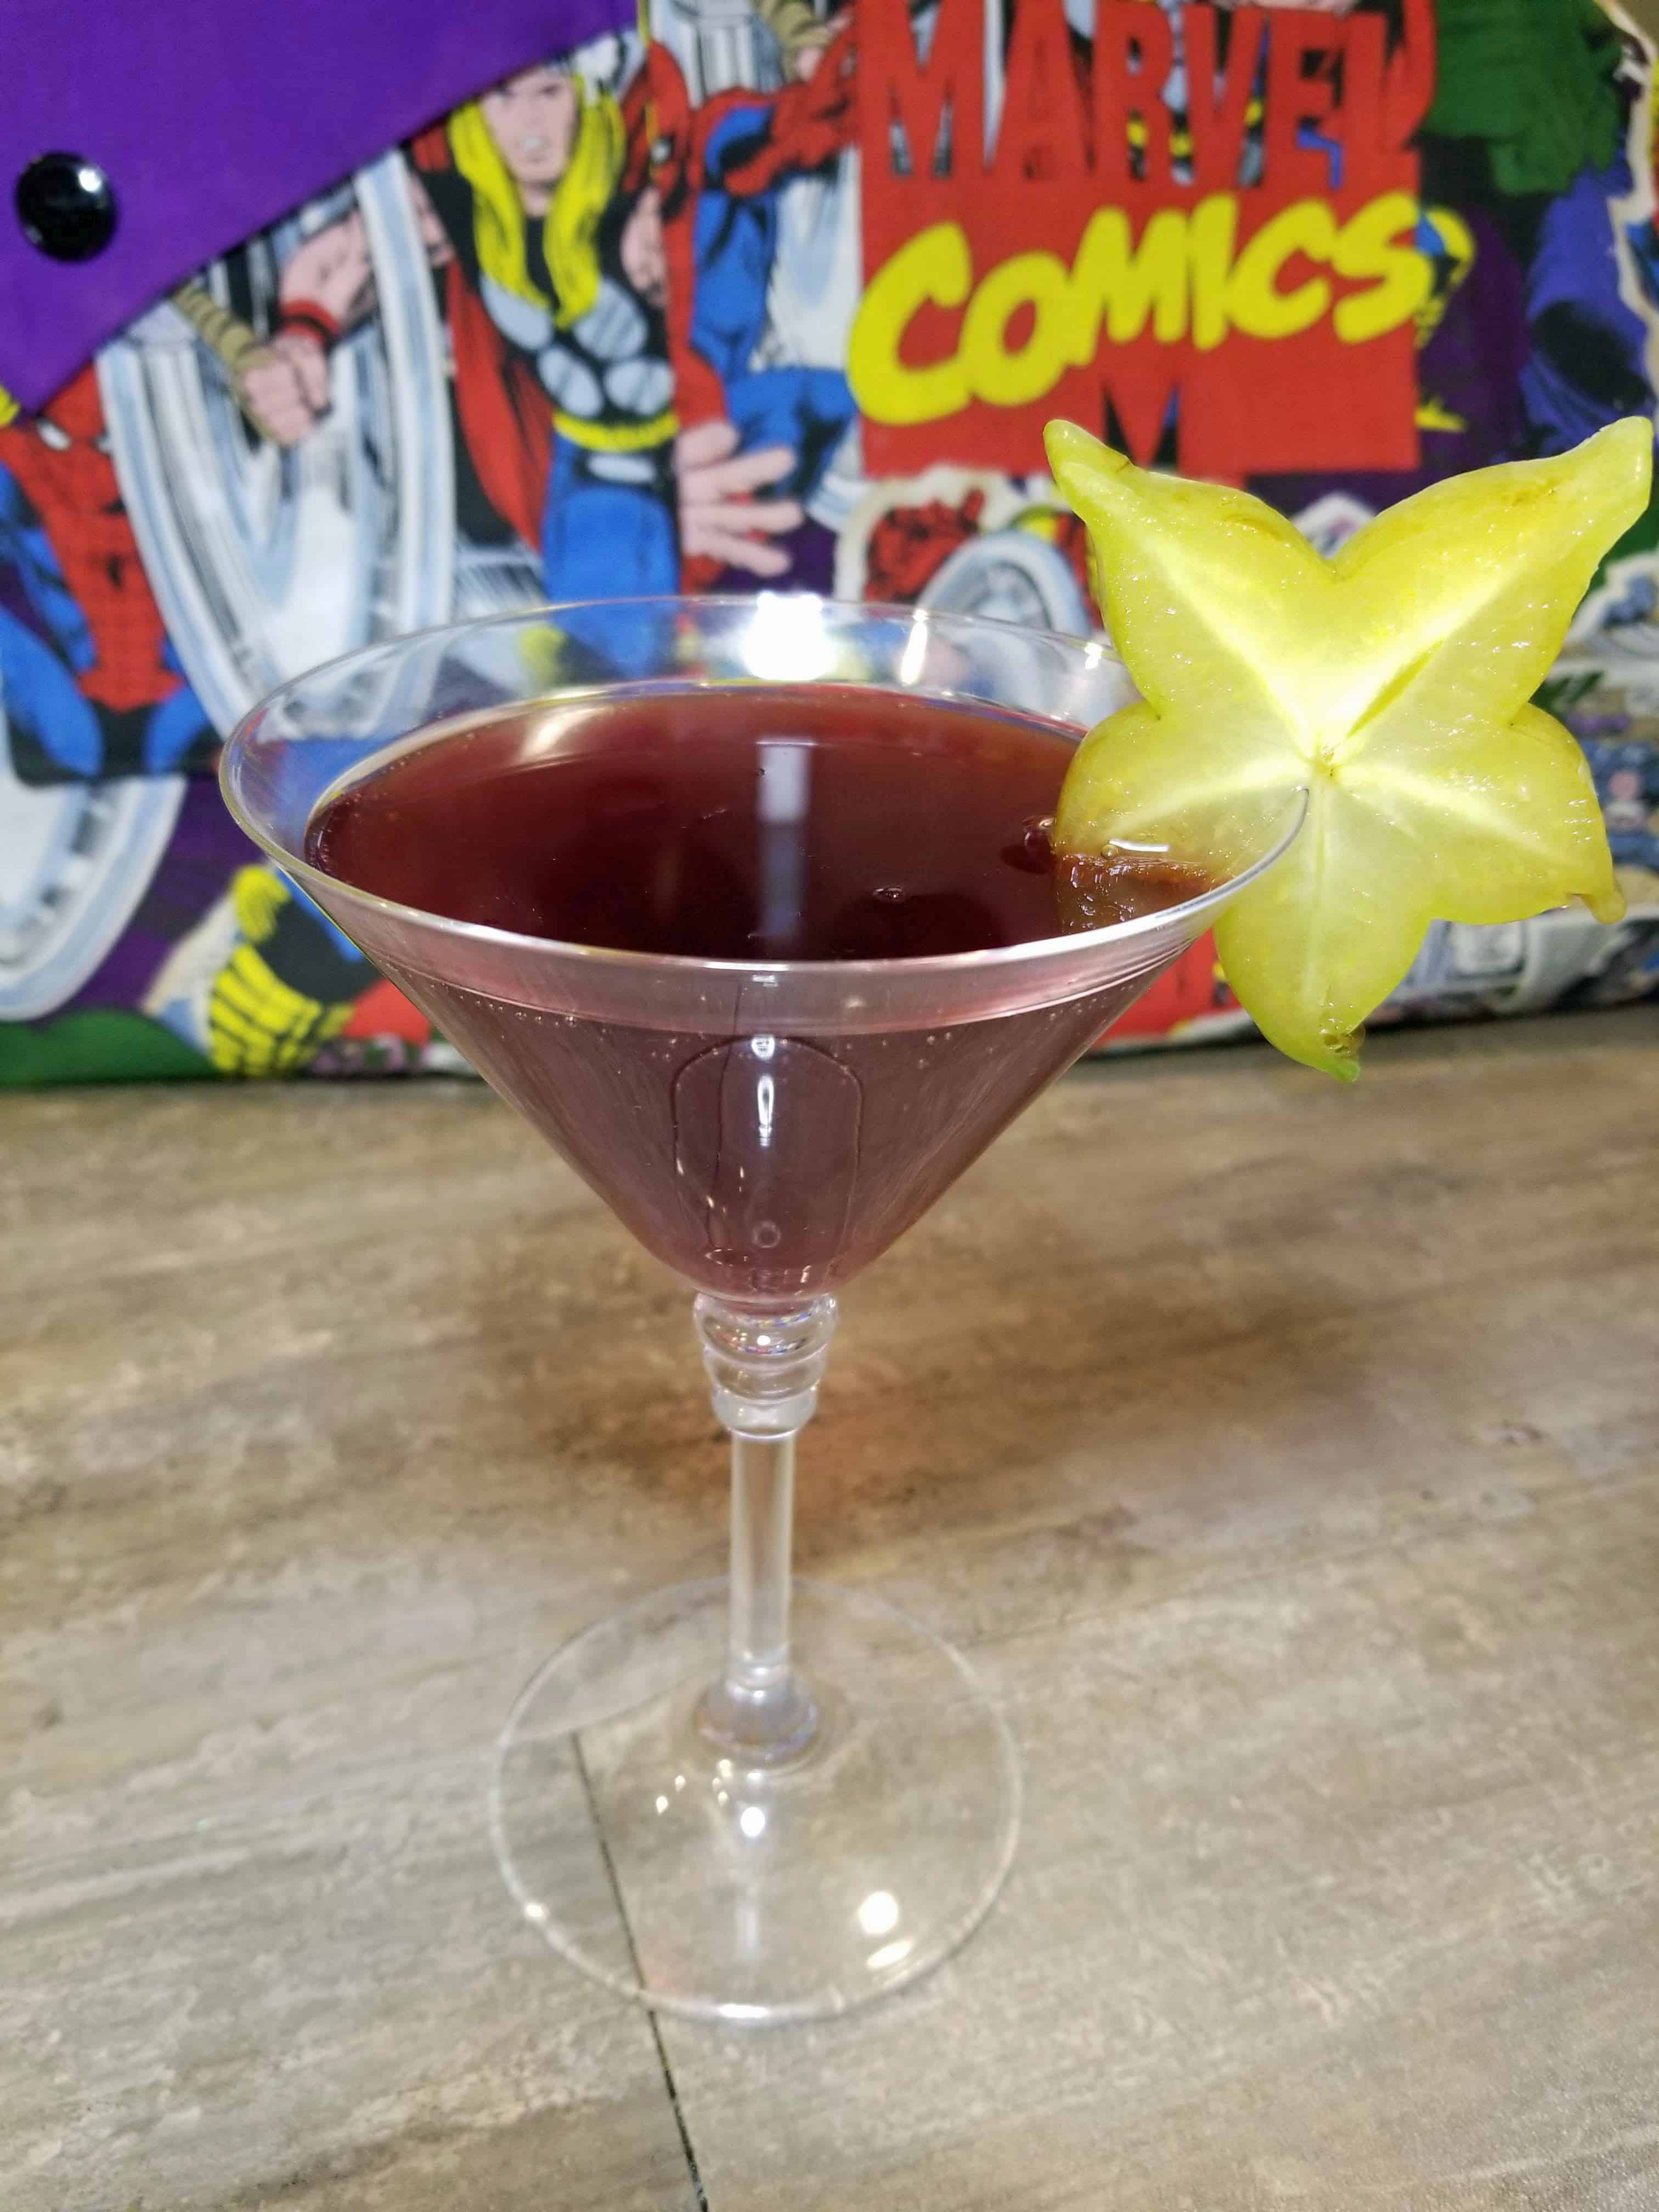 Captain Marvel Cocktail: First in Our Marvel Cocktails Series